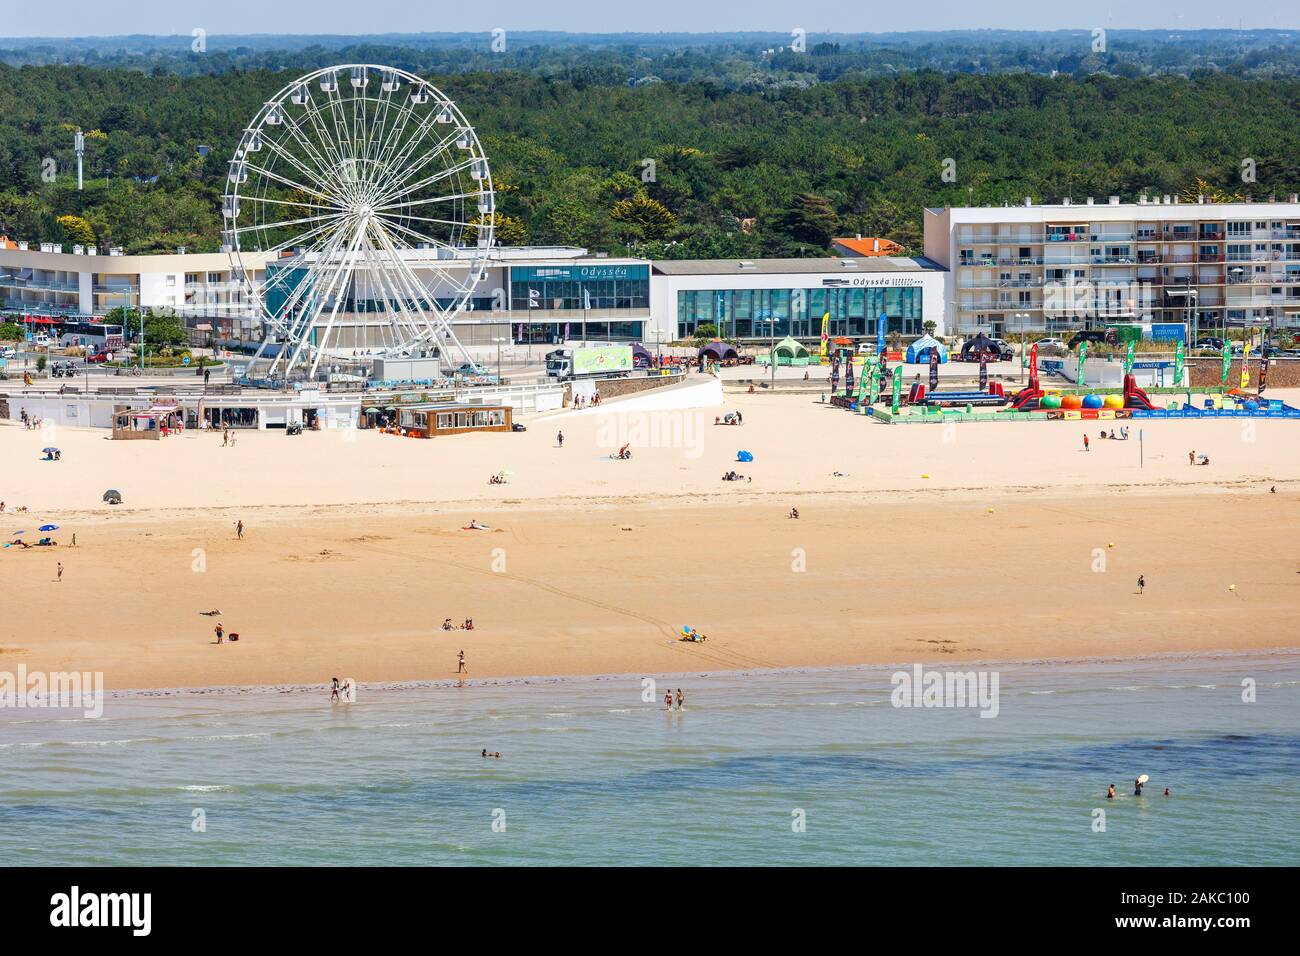 France, Vendee, St Jean de Monts, the beach and the big wheel (aerial view  Stock Photo - Alamy